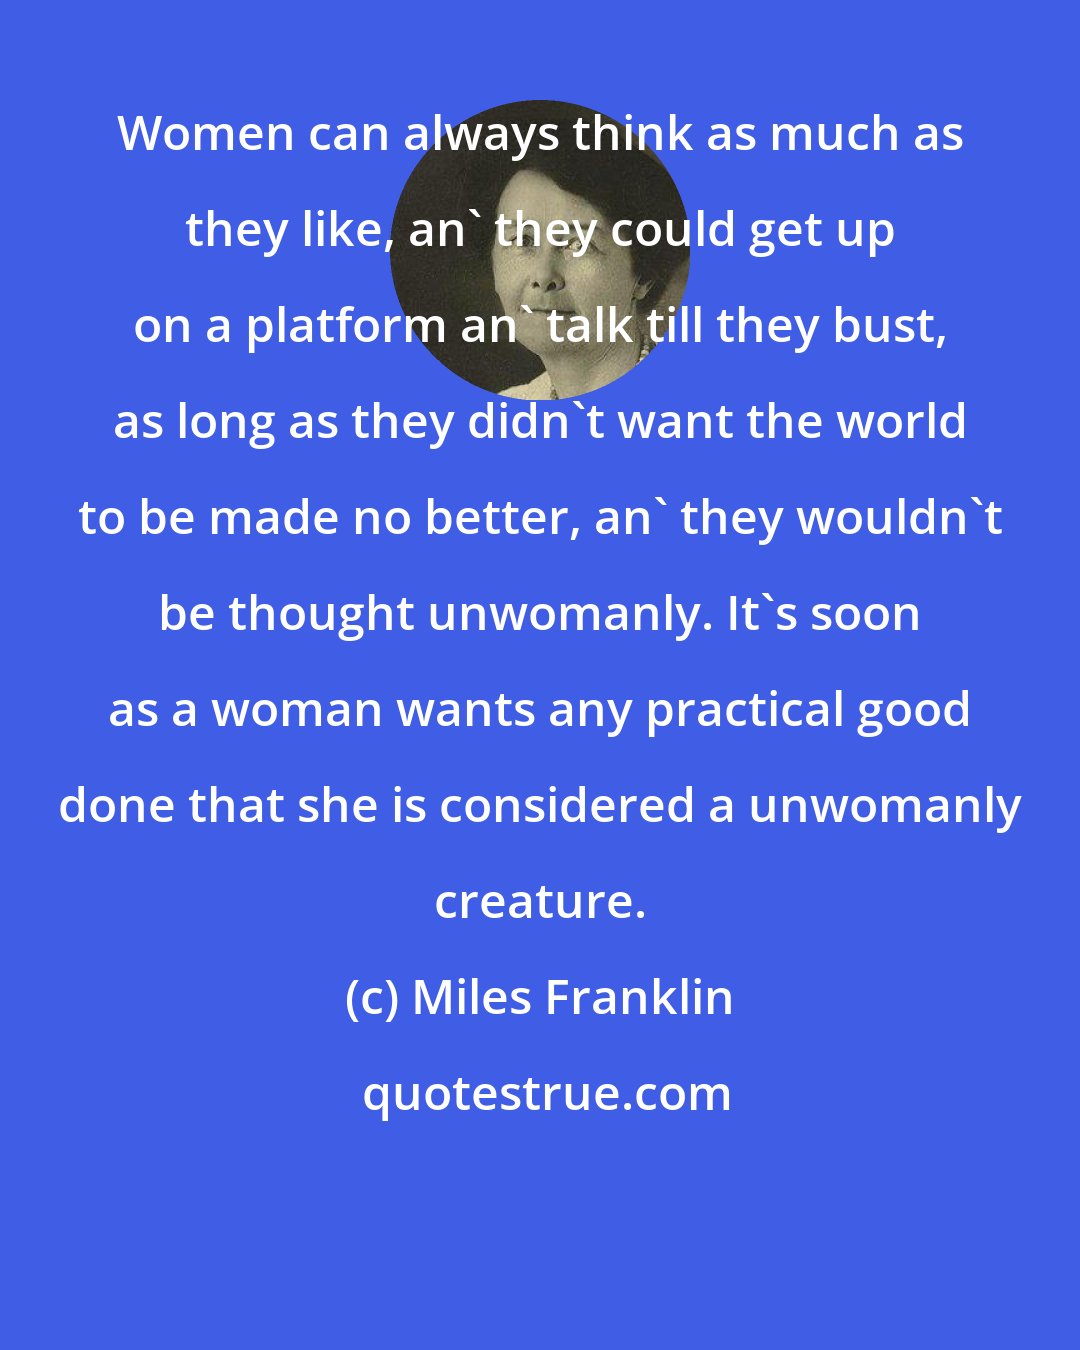 Miles Franklin: Women can always think as much as they like, an' they could get up on a platform an' talk till they bust, as long as they didn't want the world to be made no better, an' they wouldn't be thought unwomanly. It's soon as a woman wants any practical good done that she is considered a unwomanly creature.